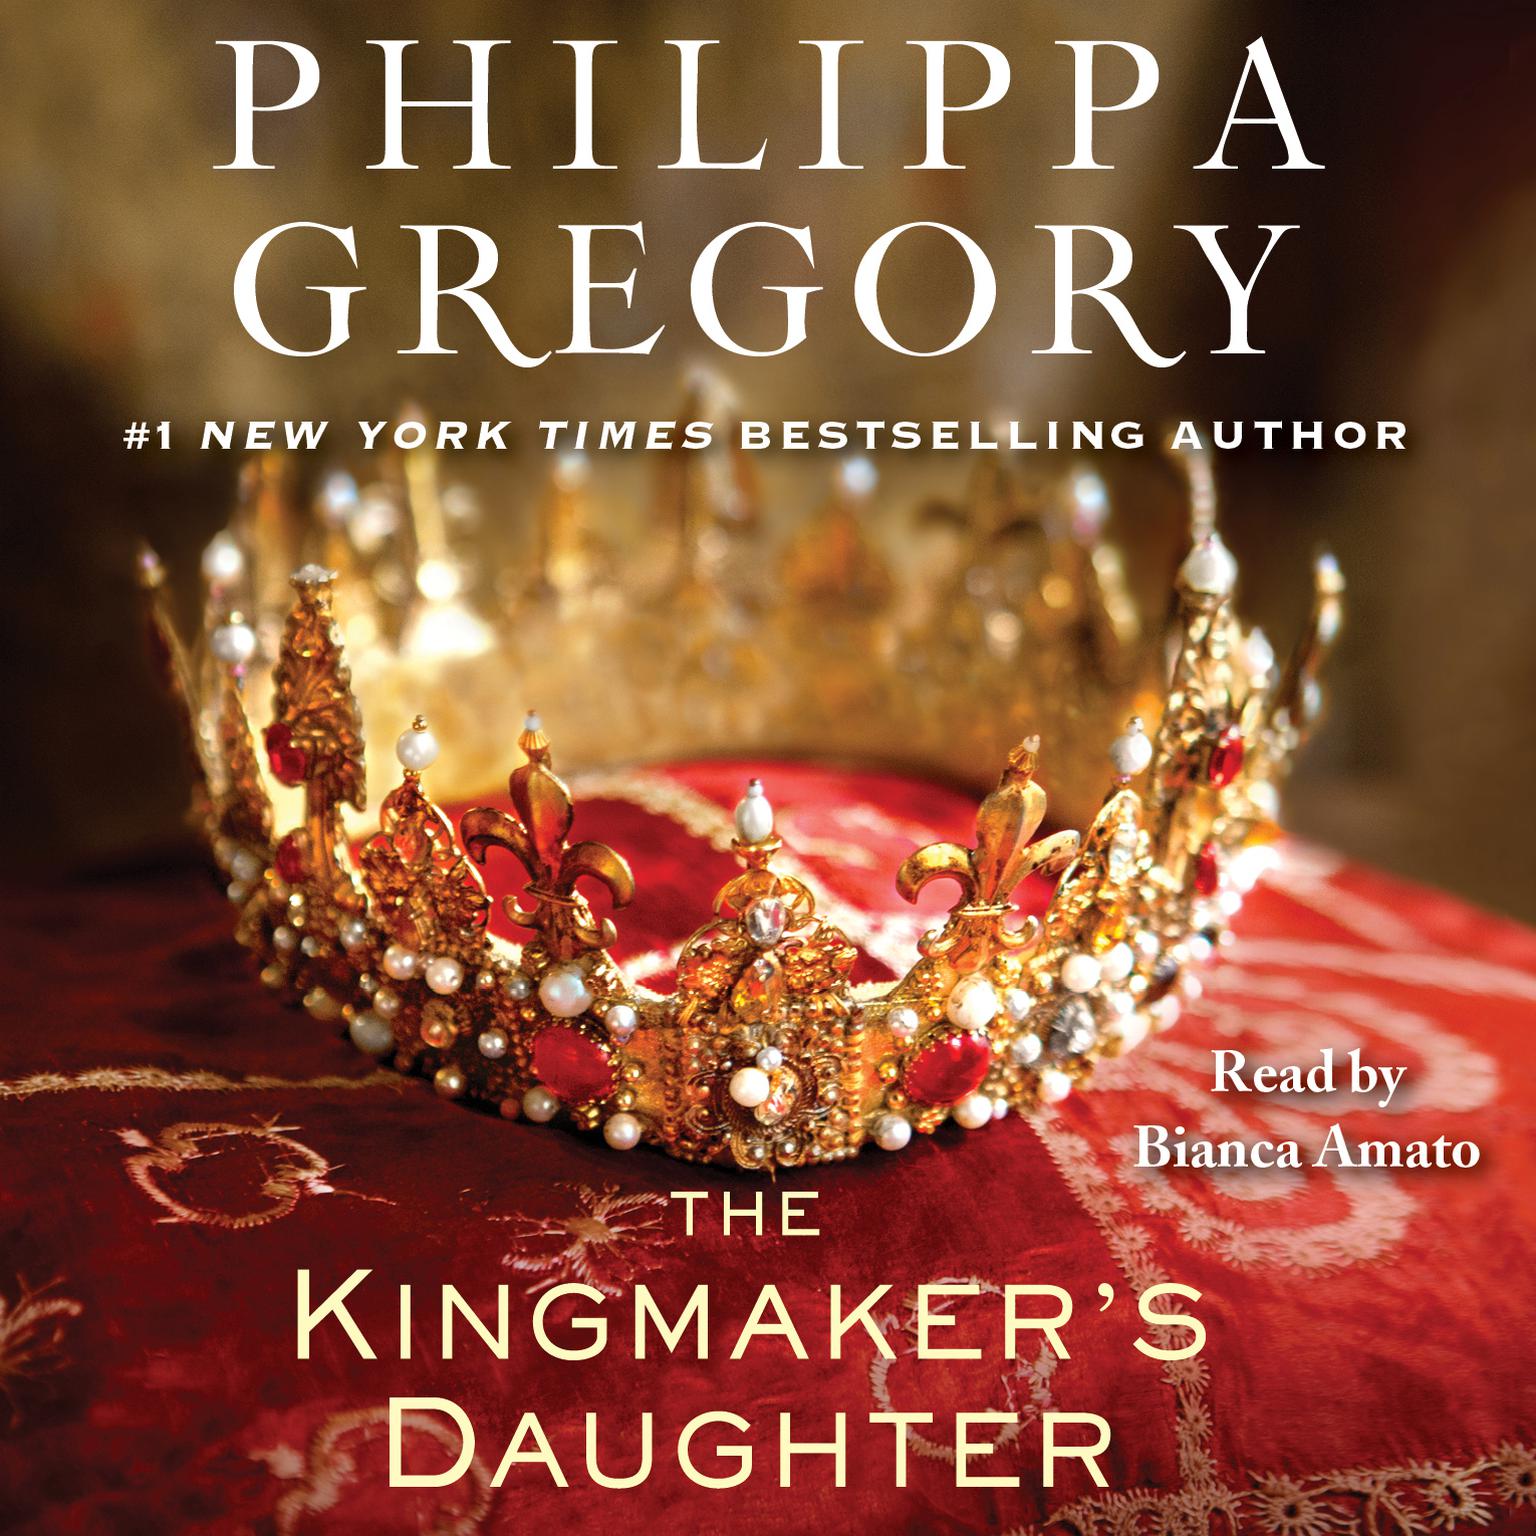 The Kingmakers Daughter Audiobook, by Philippa Gregory